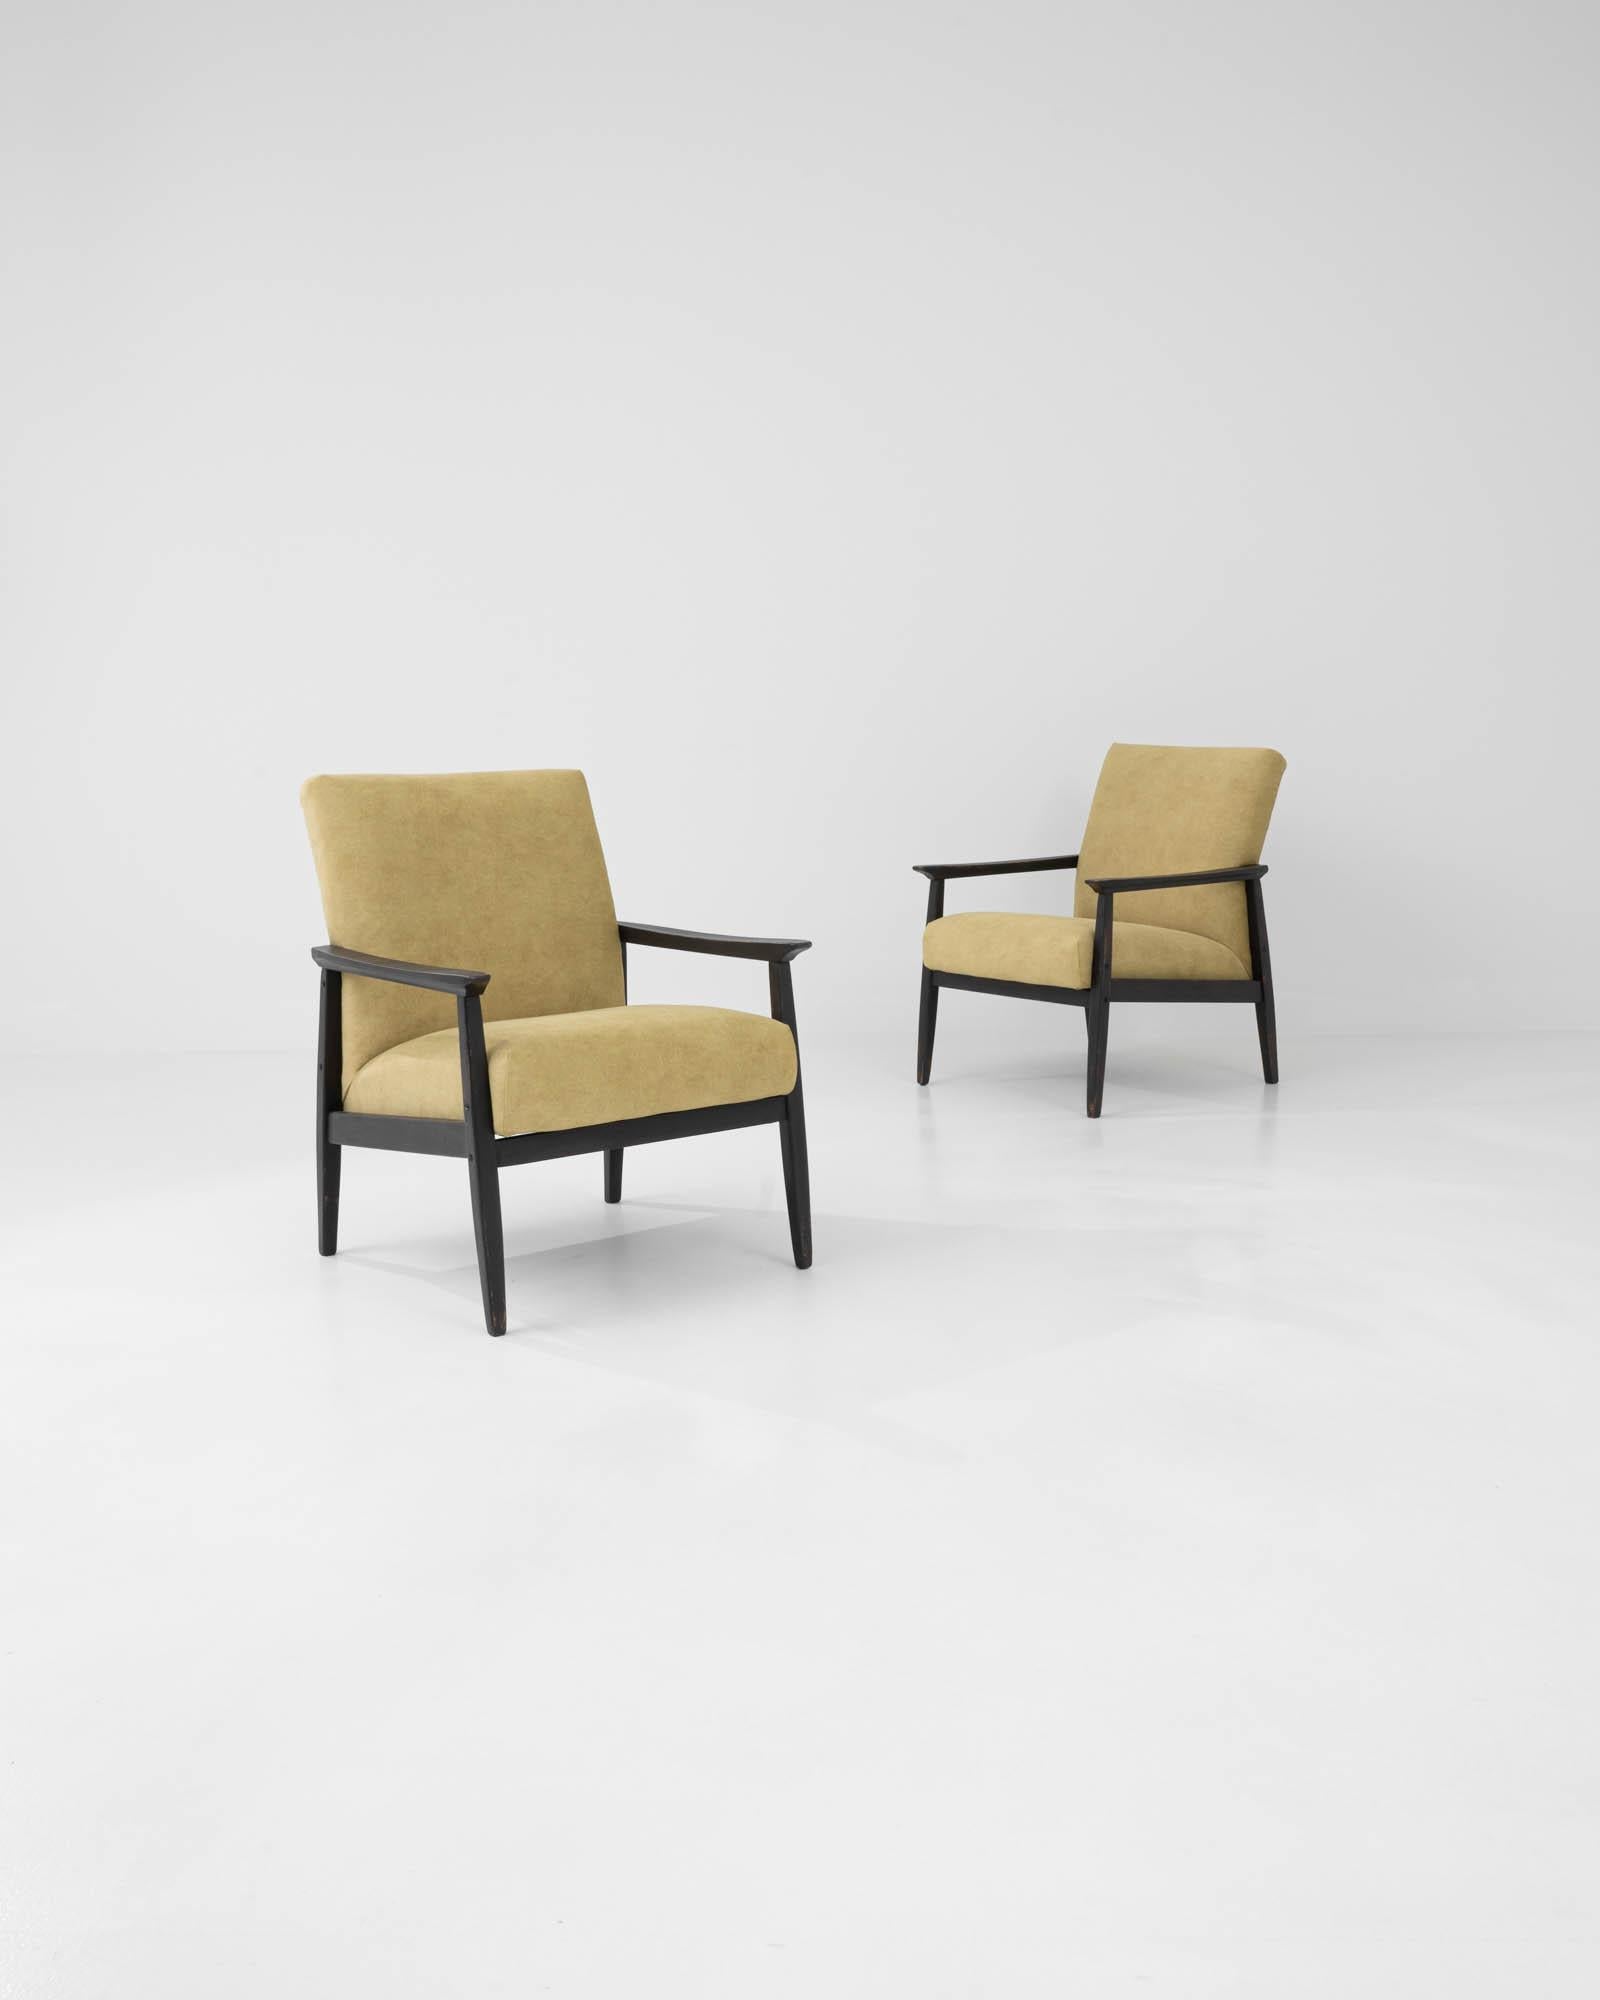 Graphic and sophisticated, this pair of vintage upholstered armchairs showcase the versatility and elegance of Central European Modernism. Made in Czechia in the 1960s, the frame combines clean angles and smooth curves for a bold yet inviting